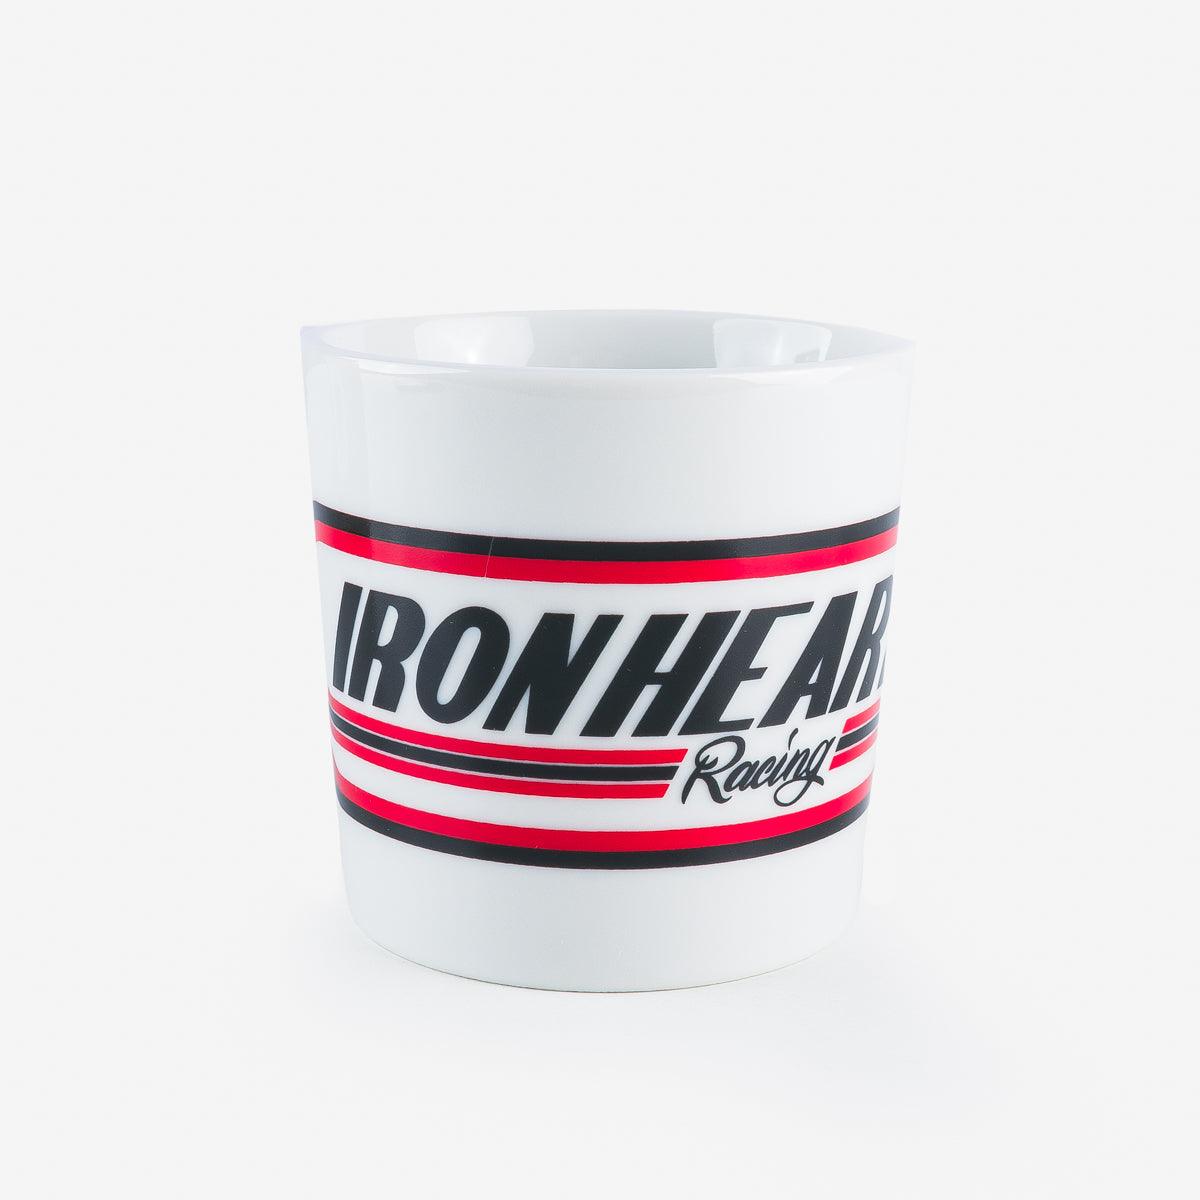 Image showing the IHG-112-RA - Iron Heart "Racing" coffee Mug which is a Others described by the following info Accessories, Iron Heart, New, Others, Released and sold on the IRON HEART GERMANY online store